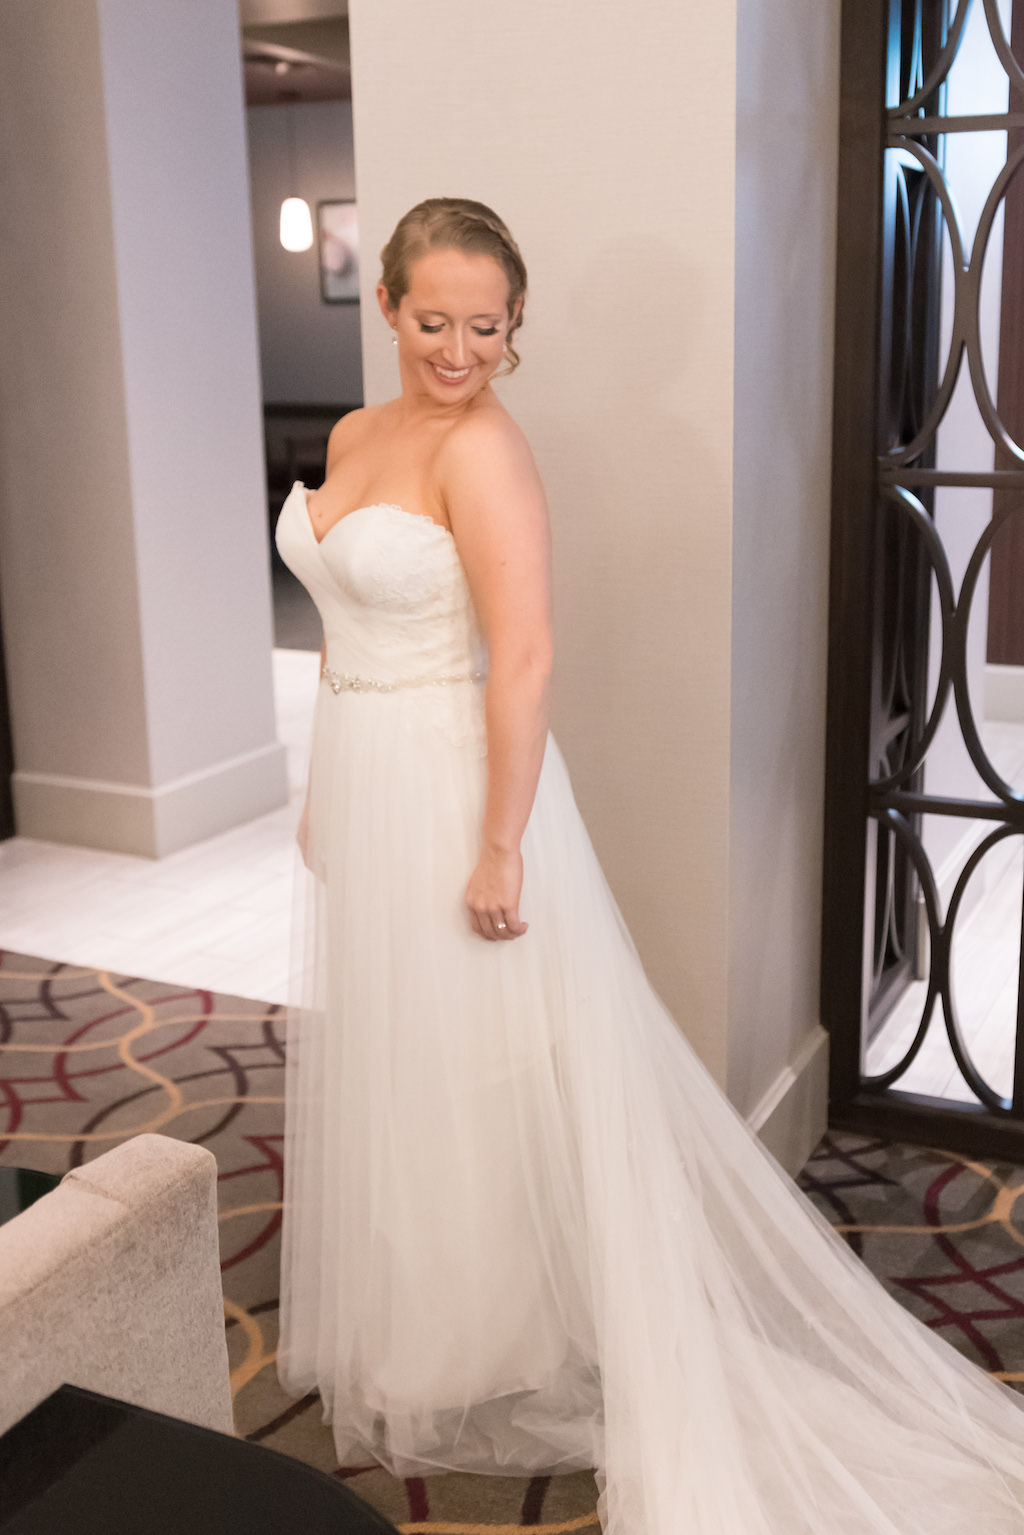 Bride Getting Ready Portrait in Strapless A Line Maggie Sottero Belted Wedding Dress | Tampa Bay Wedding Photographer Carrie Wildes Photography